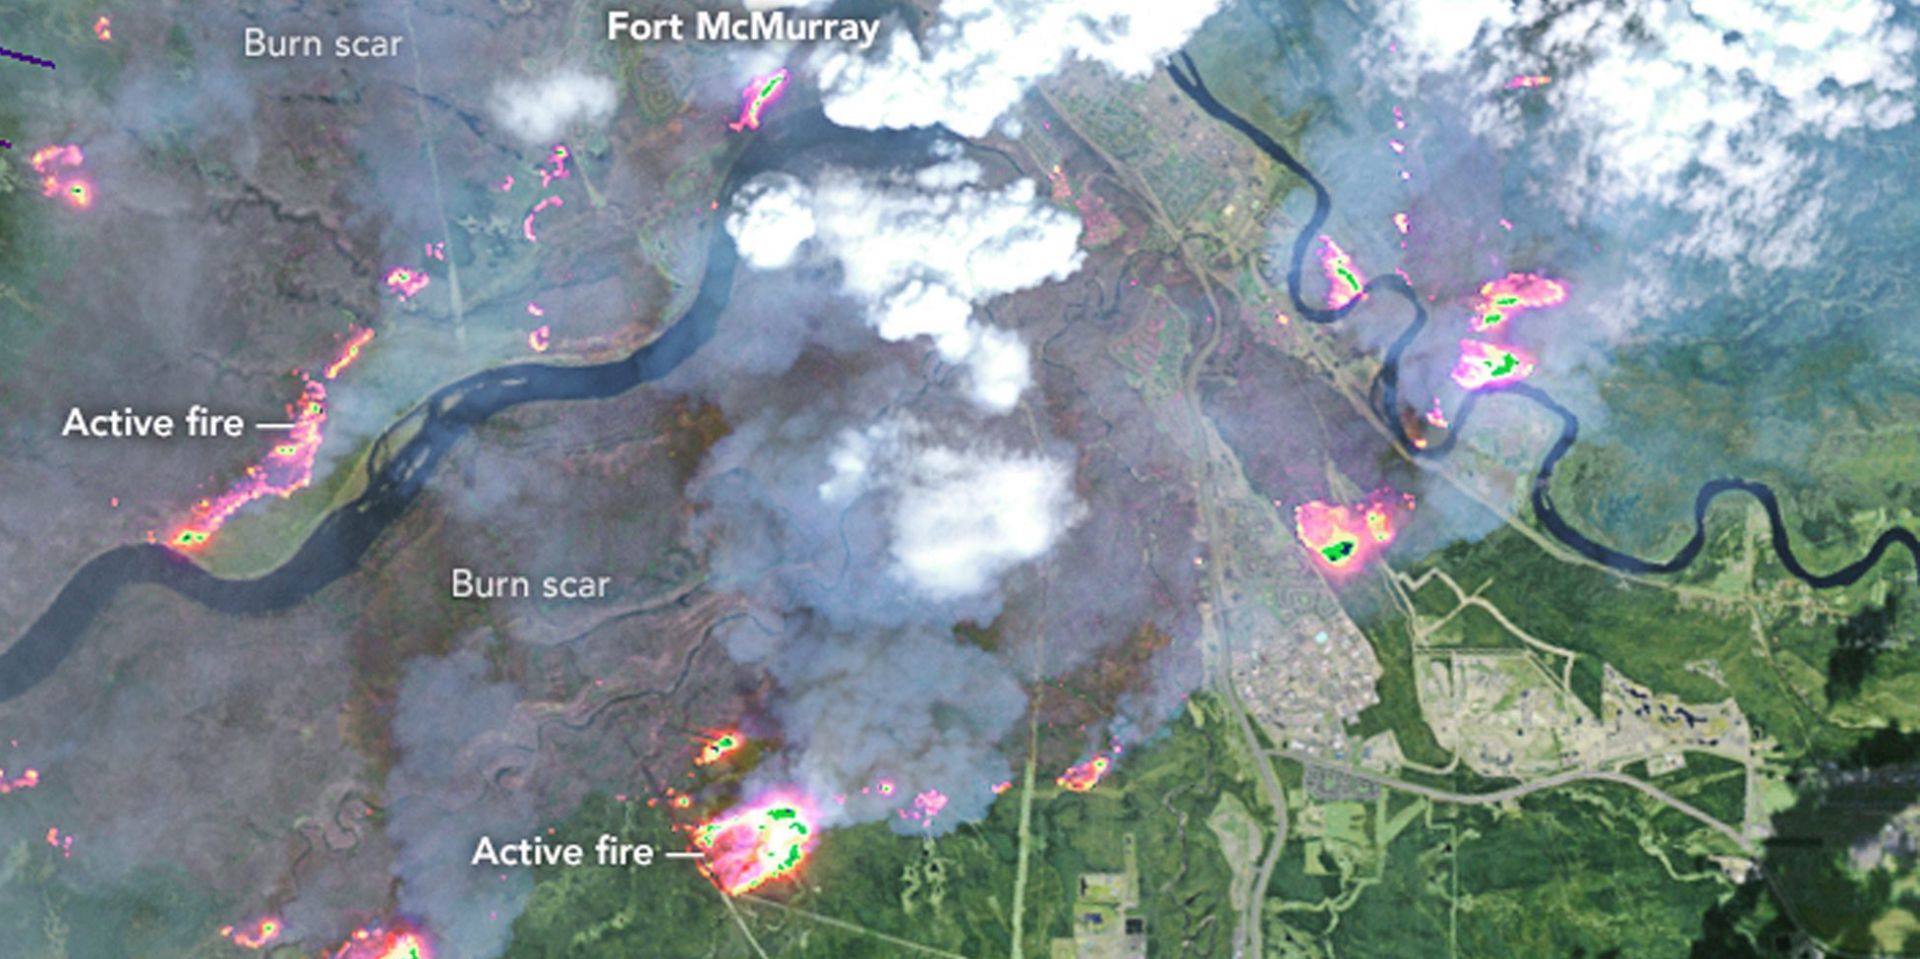 epa05293138 A handout satelite image made avaliable on 07 May 2016 by NASA Earth Observatory showing Fort McMurray on 04 May 2016, acquired by the Enhanced Thematic Mapper Plus (ETM+) on the Landsat 7 satellite. This false-color image combines shortwave infrared, near infrared, and green light (bands 5-4-2). Near- and short-wave infrared help penetrate clouds and smoke to reveal the hot spots associated with active fires, which appear red. Smoke appears white and burned areas appear brown. On this day the fire spanned about 100 square kilometers (40 square miles); by the morning of 05 May, it spanned about 850 square kilometers (330 square miles). Reports on 07 May 2016 state that the wildfire which has destroyed Fort McMurray could double in size over the next 24 hours as the fire is being fanned by winds and feeding on dry vegetation.  EPA/NASA EARTH OBSERVATORY / HANDOUT  HANDOUT EDITORIAL USE ONLY/NO SALES